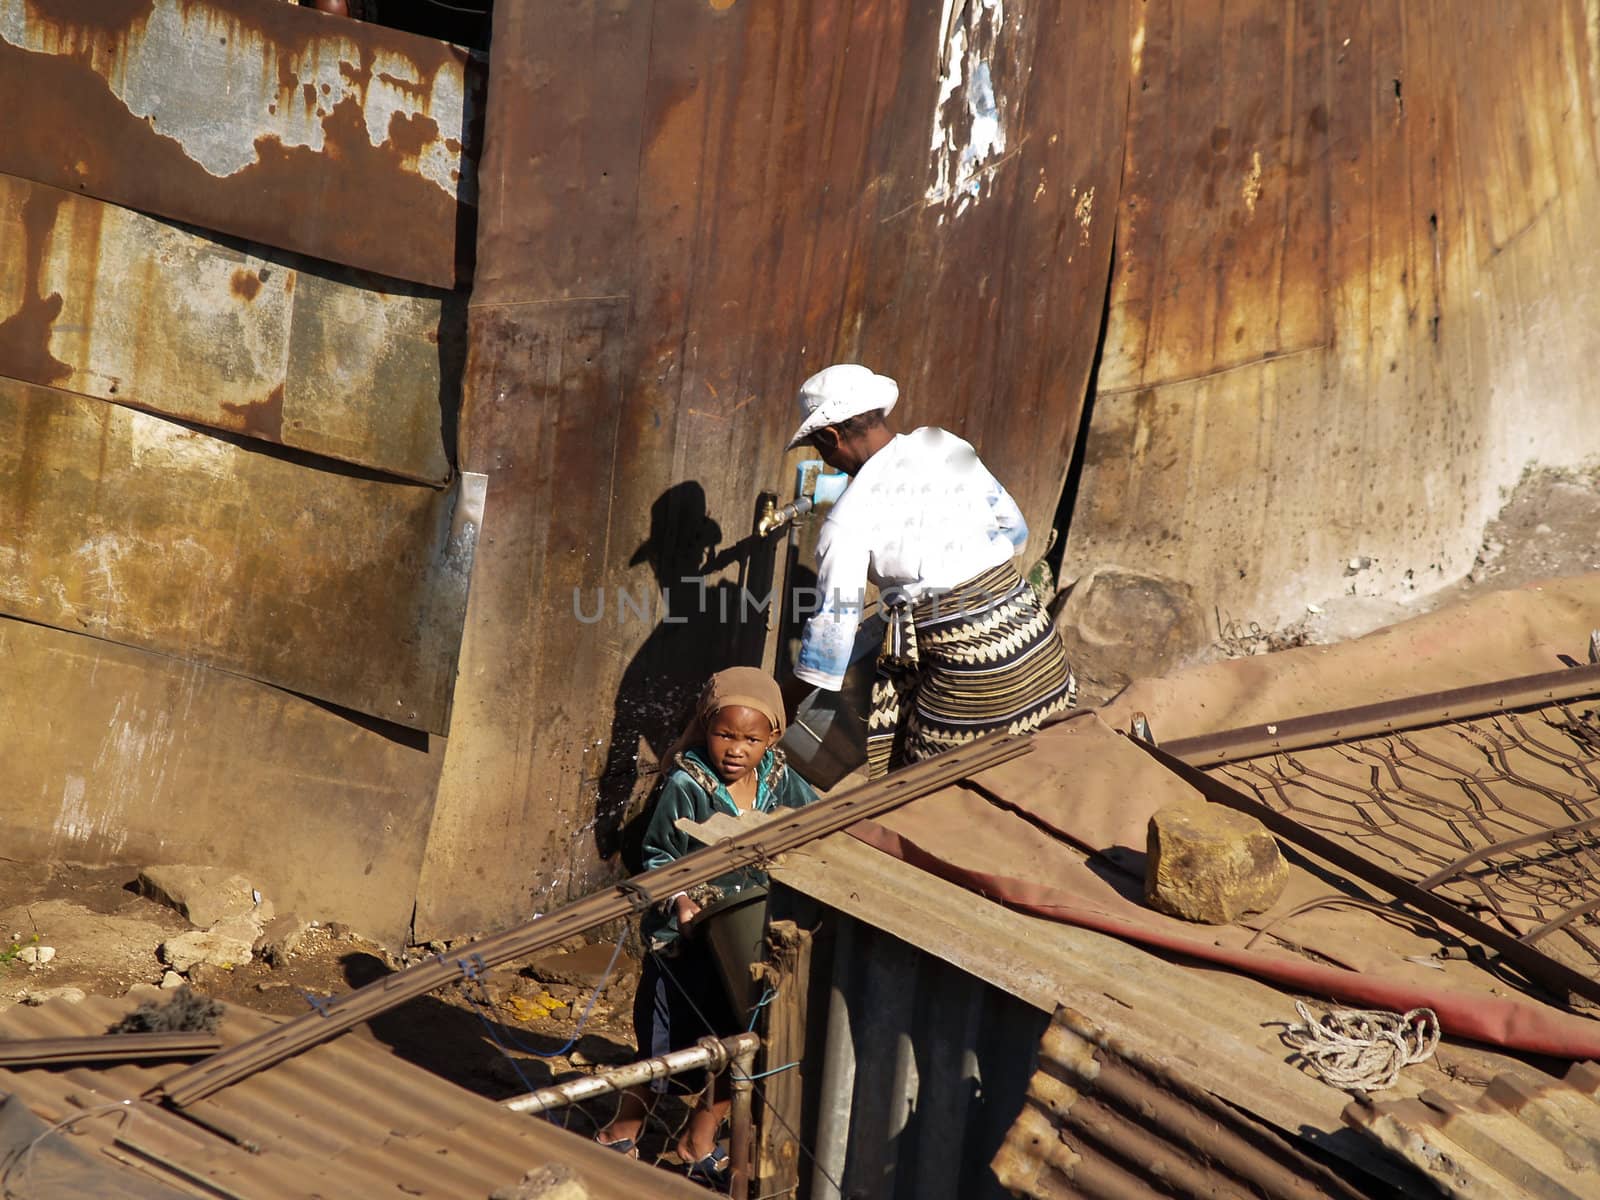 Woman obtains water from standpipe outside a Soweto shanty town shack, while child looks on.







Woman get water from standpipe amongst the rusty iron homes in the Soweto squatter village.